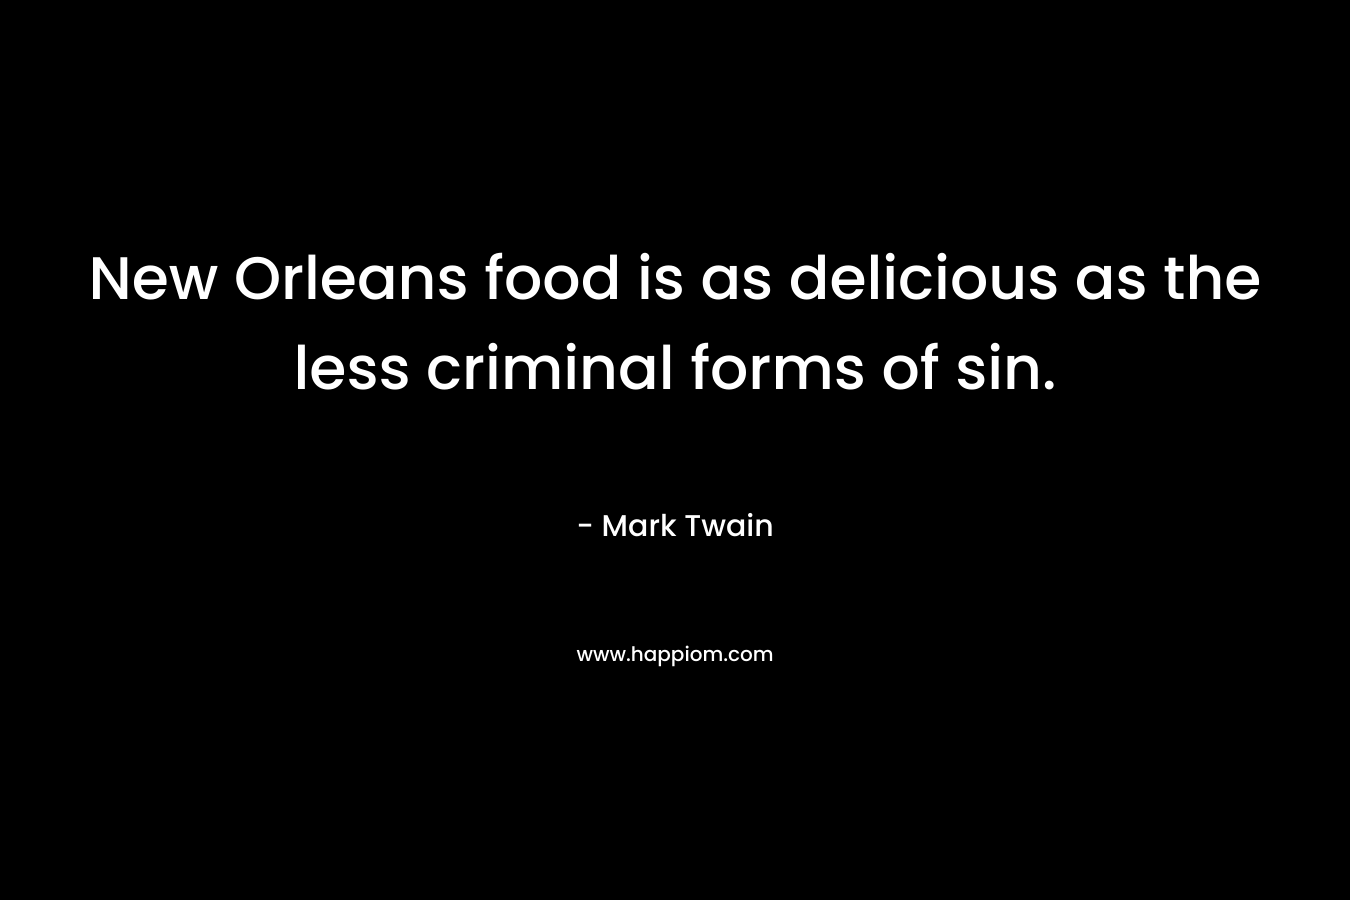 New Orleans food is as delicious as the less criminal forms of sin.